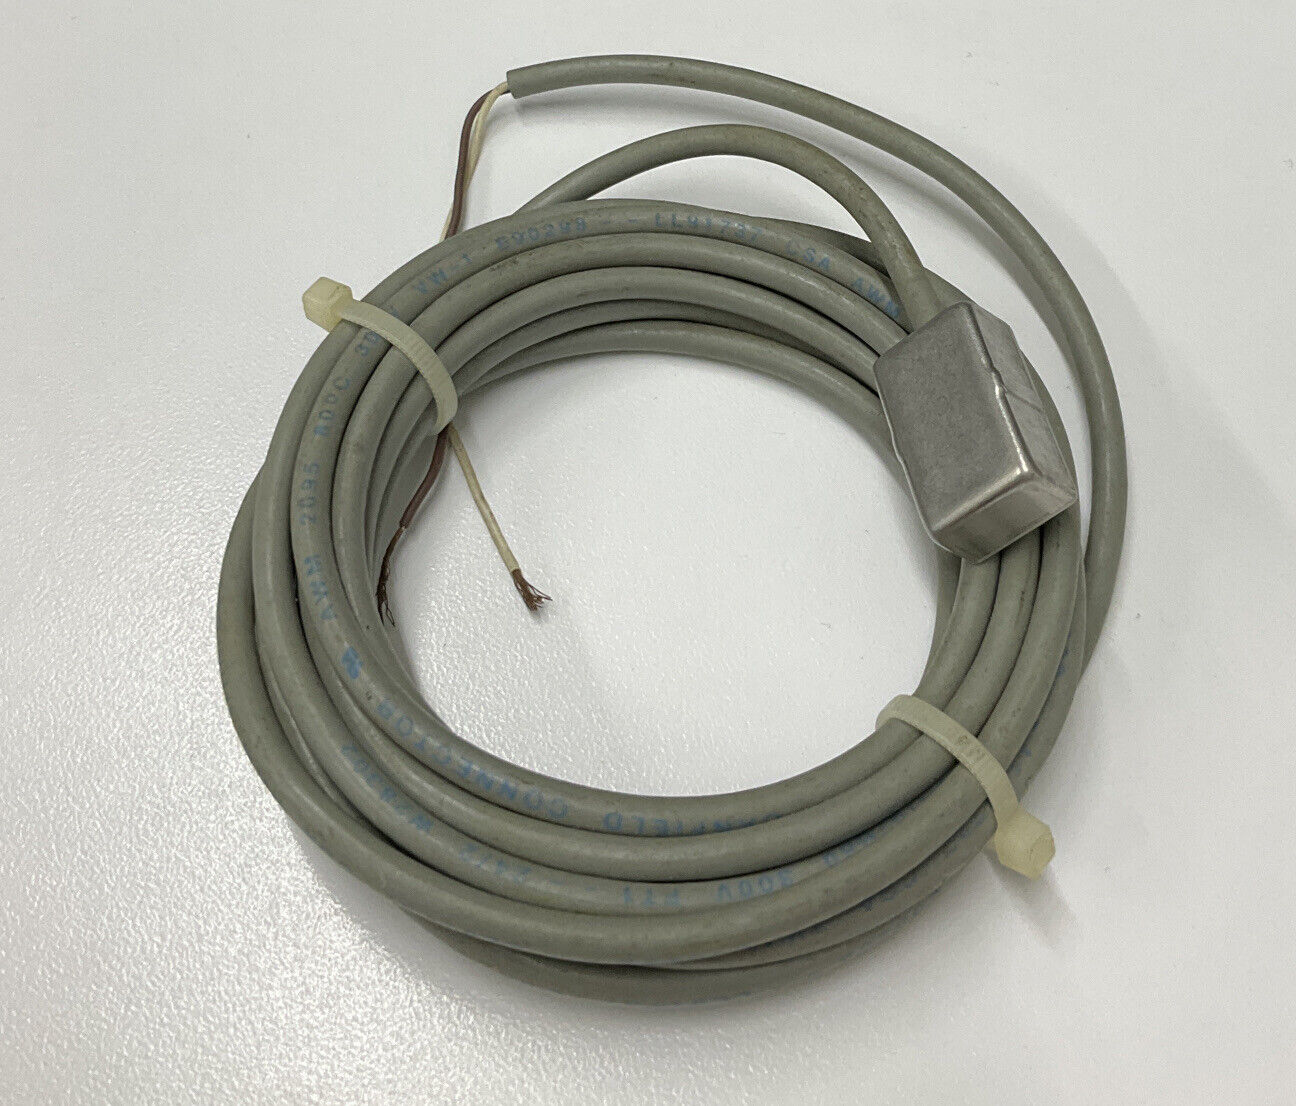 Canfield Connector 810-000-004 Reed Switch 120V (CL240) - 0